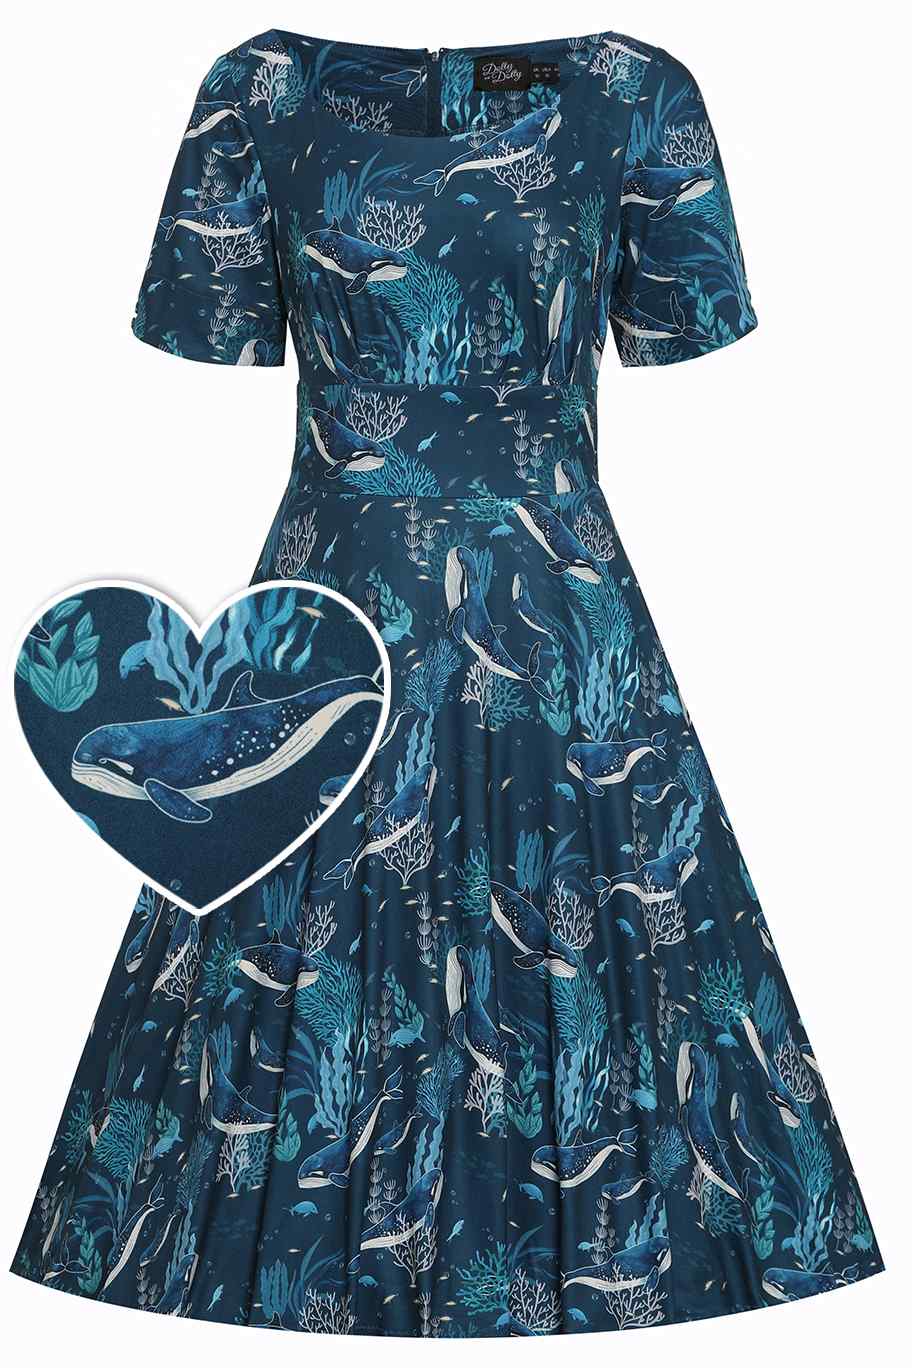 Front view of blue whale print sleeved swing dress in blue